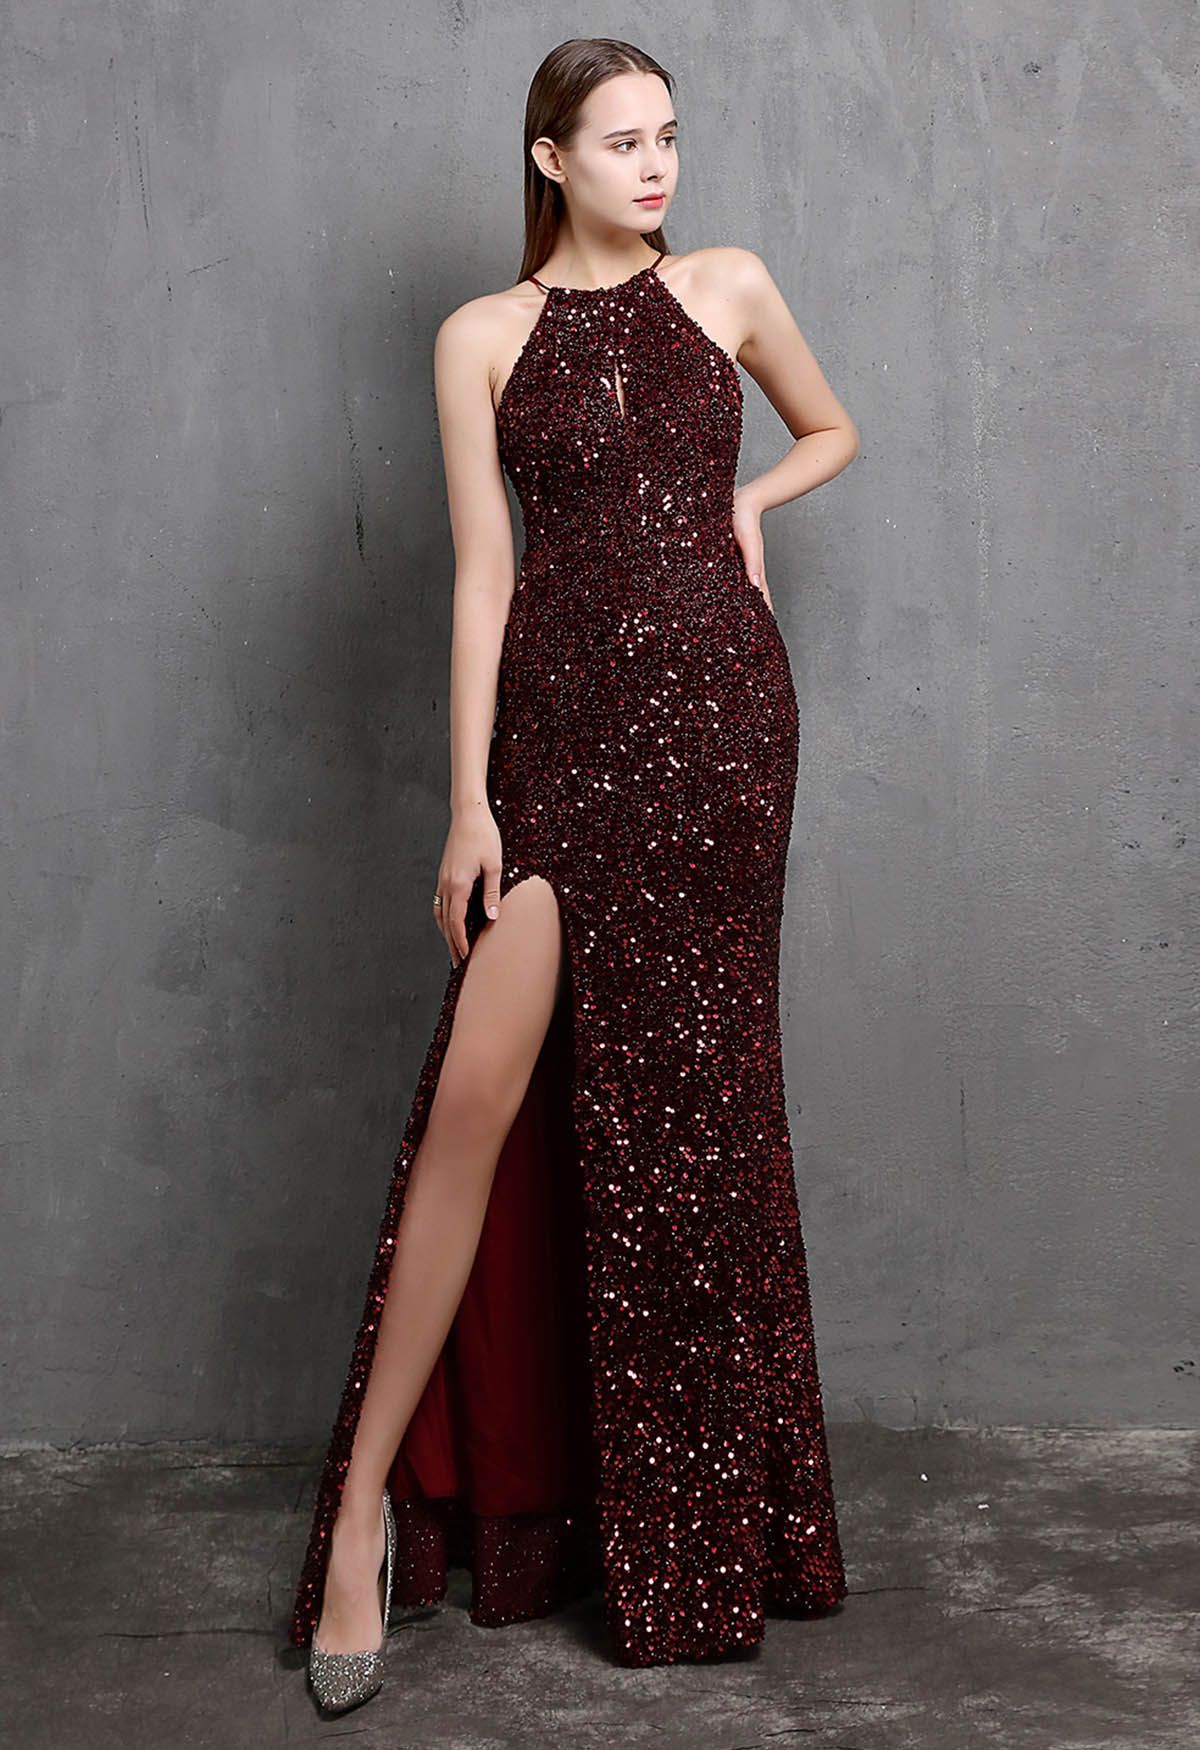 Halter Neck Cutout Sequined Slit Mermaid Gown in Burgundy